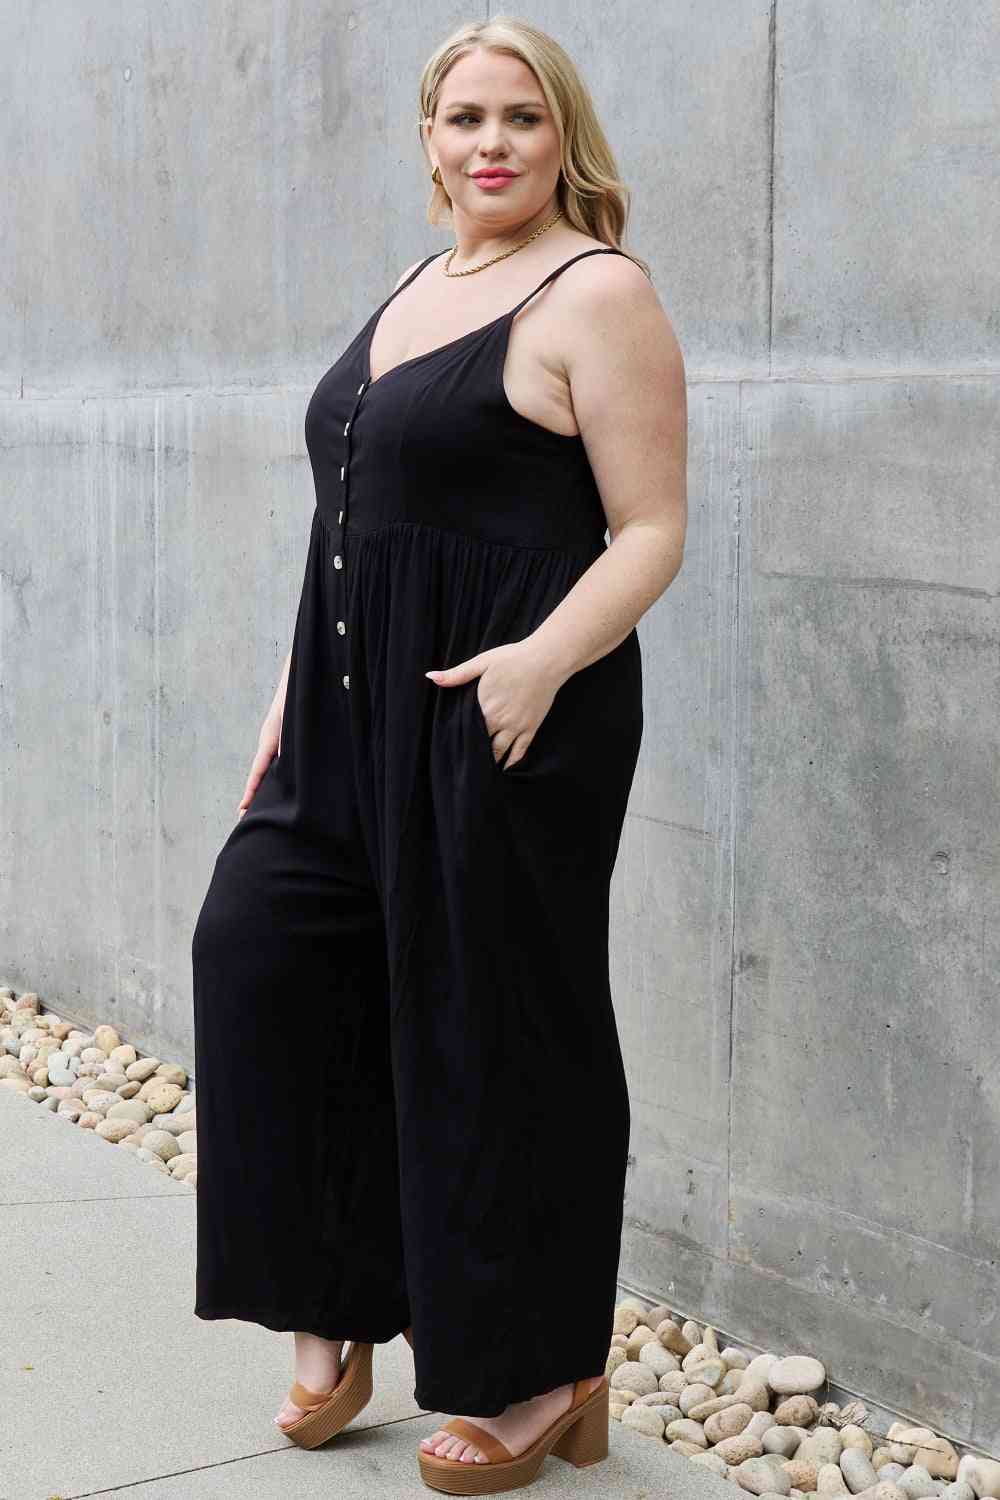 HEYSON All Day Full Size Wide Leg Button Down Jumpsuit in Black - The Teal Antler Boutique